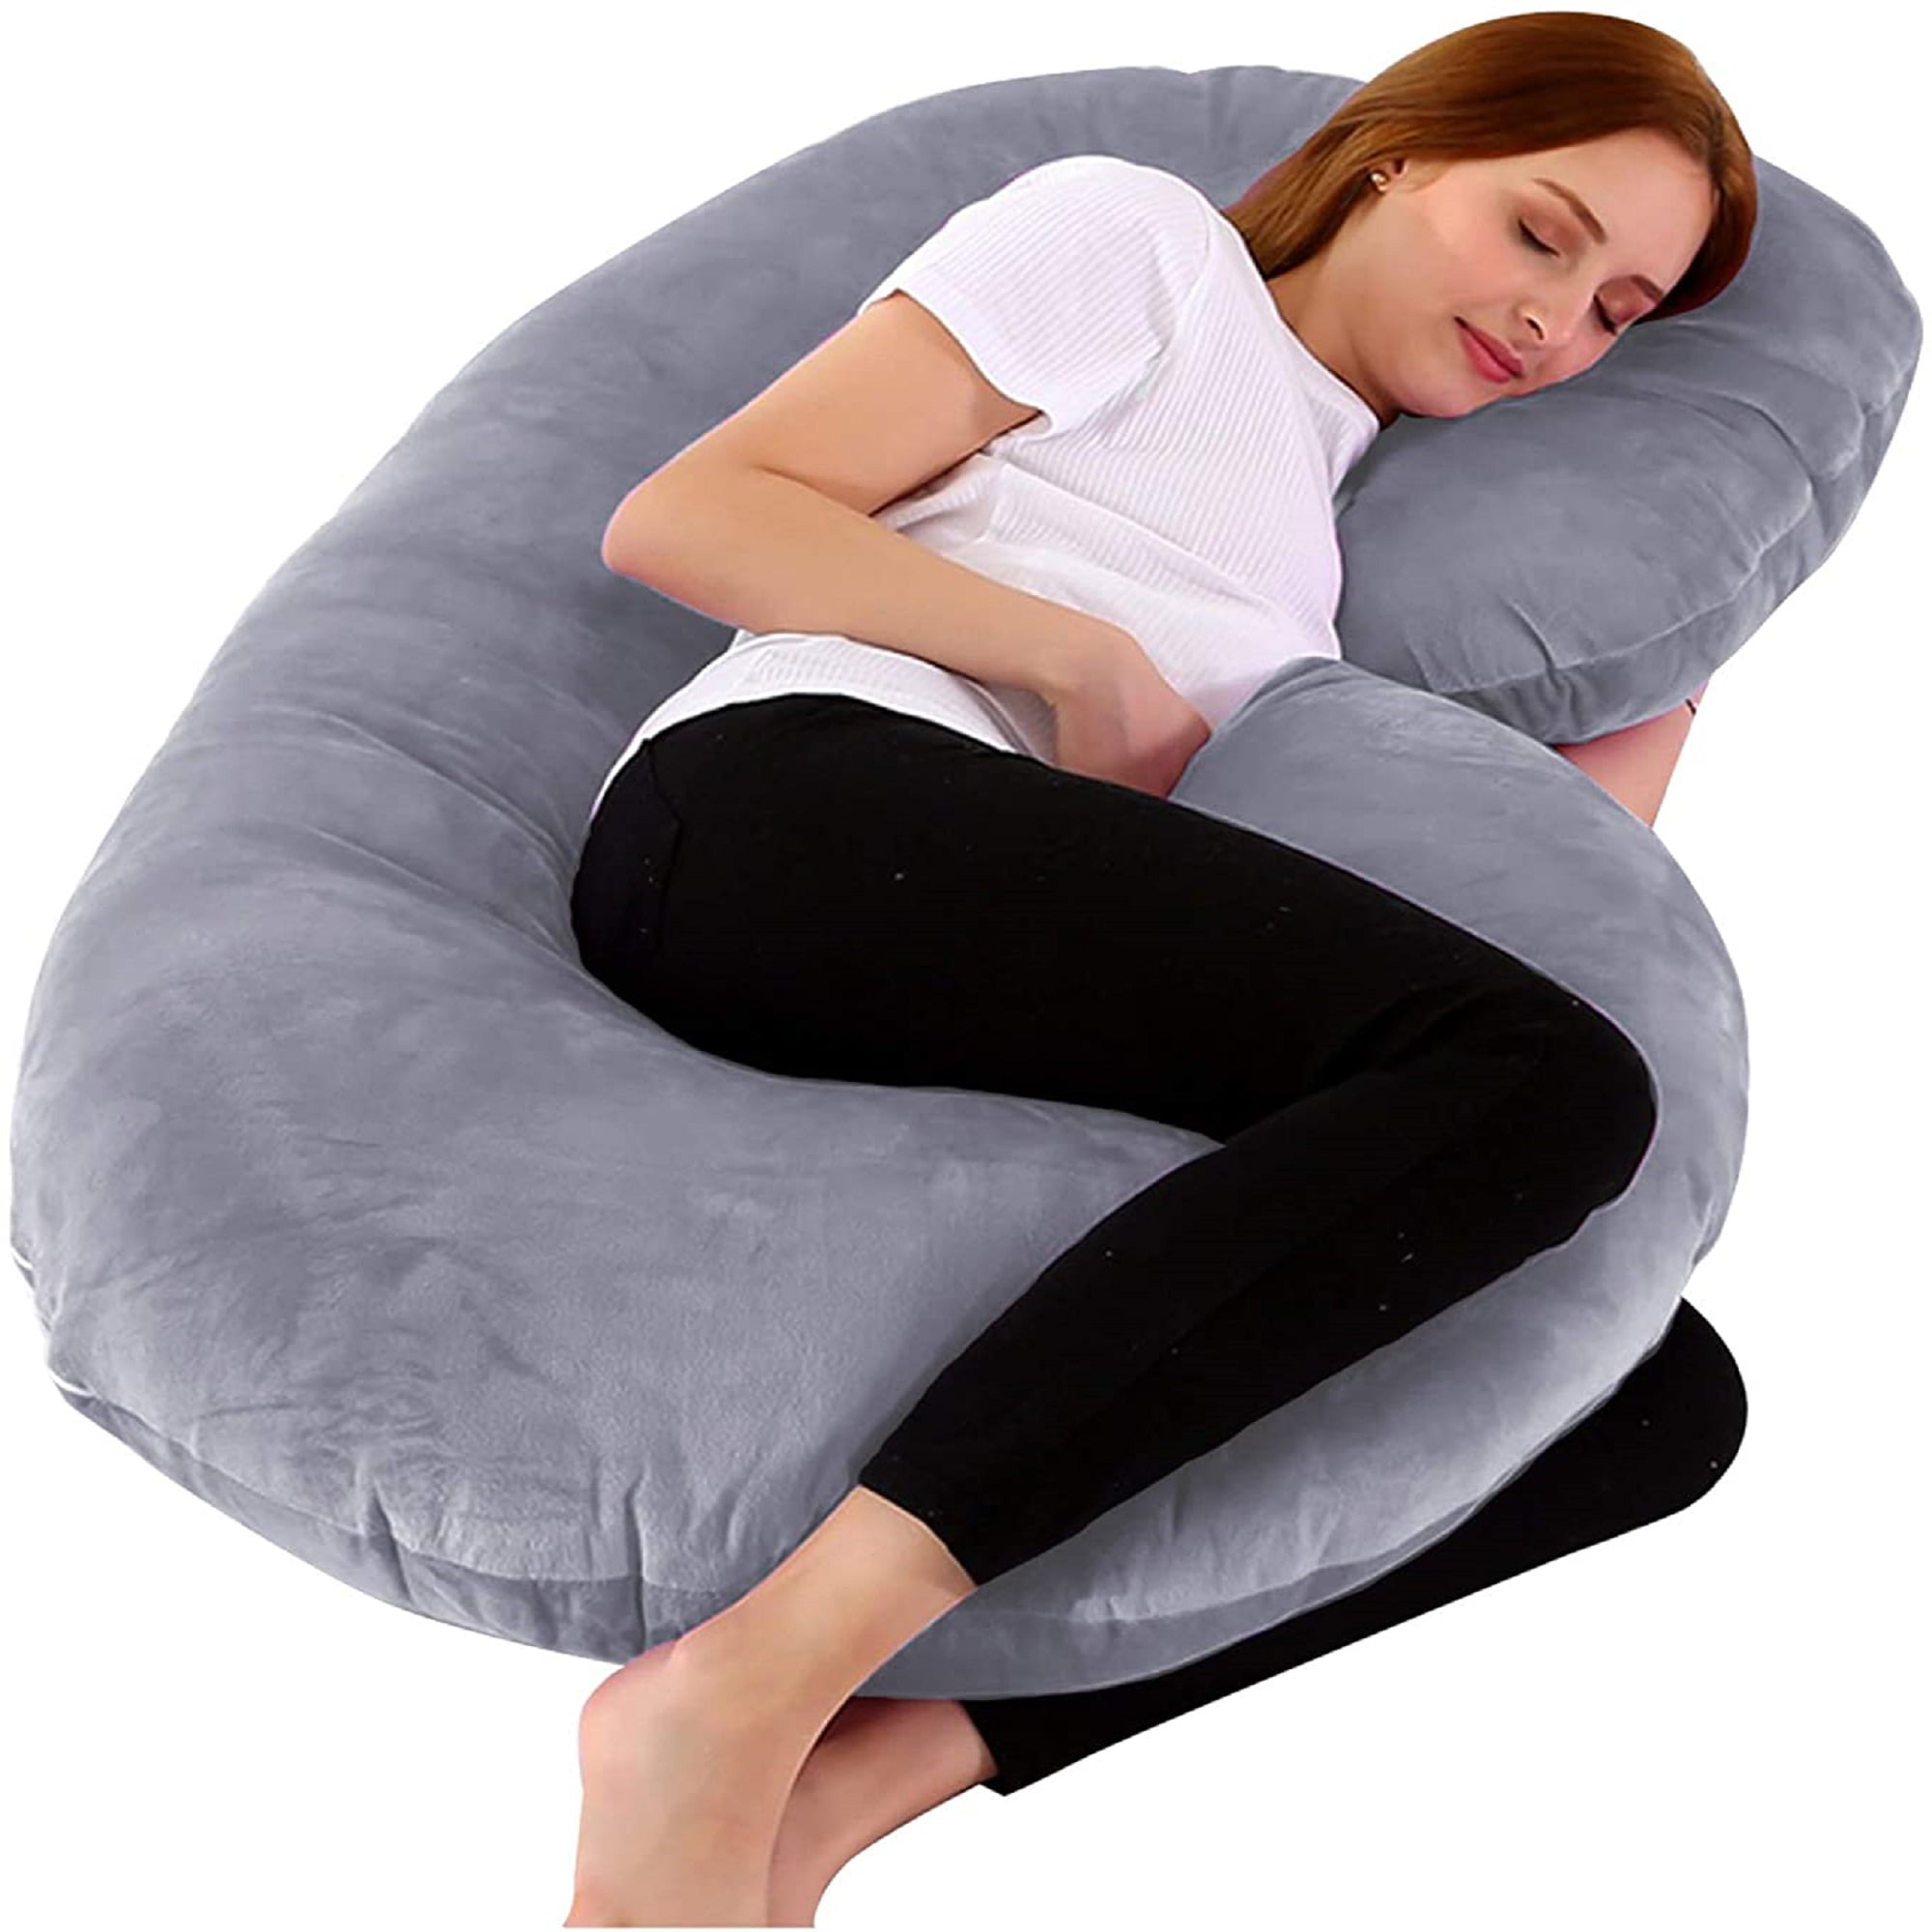 Cushion Pregnancy Pillow Maternity Belly Contoured Body Pregnant C Shape Blue 